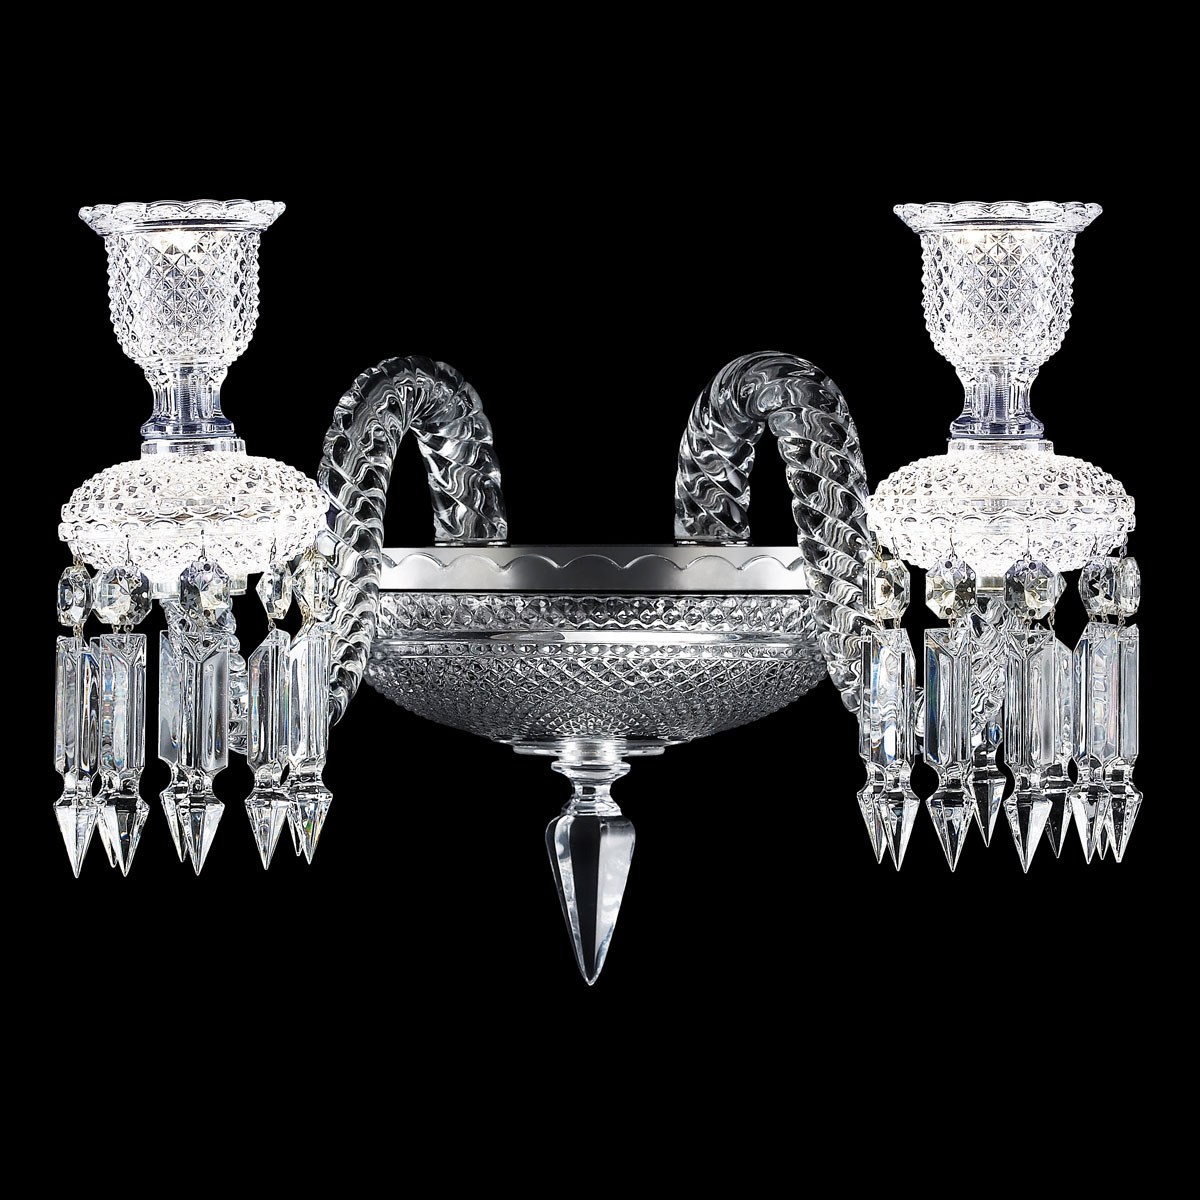 Baccarat Crystal, Zenith Comete 2-Light Wall Crystal Sconce